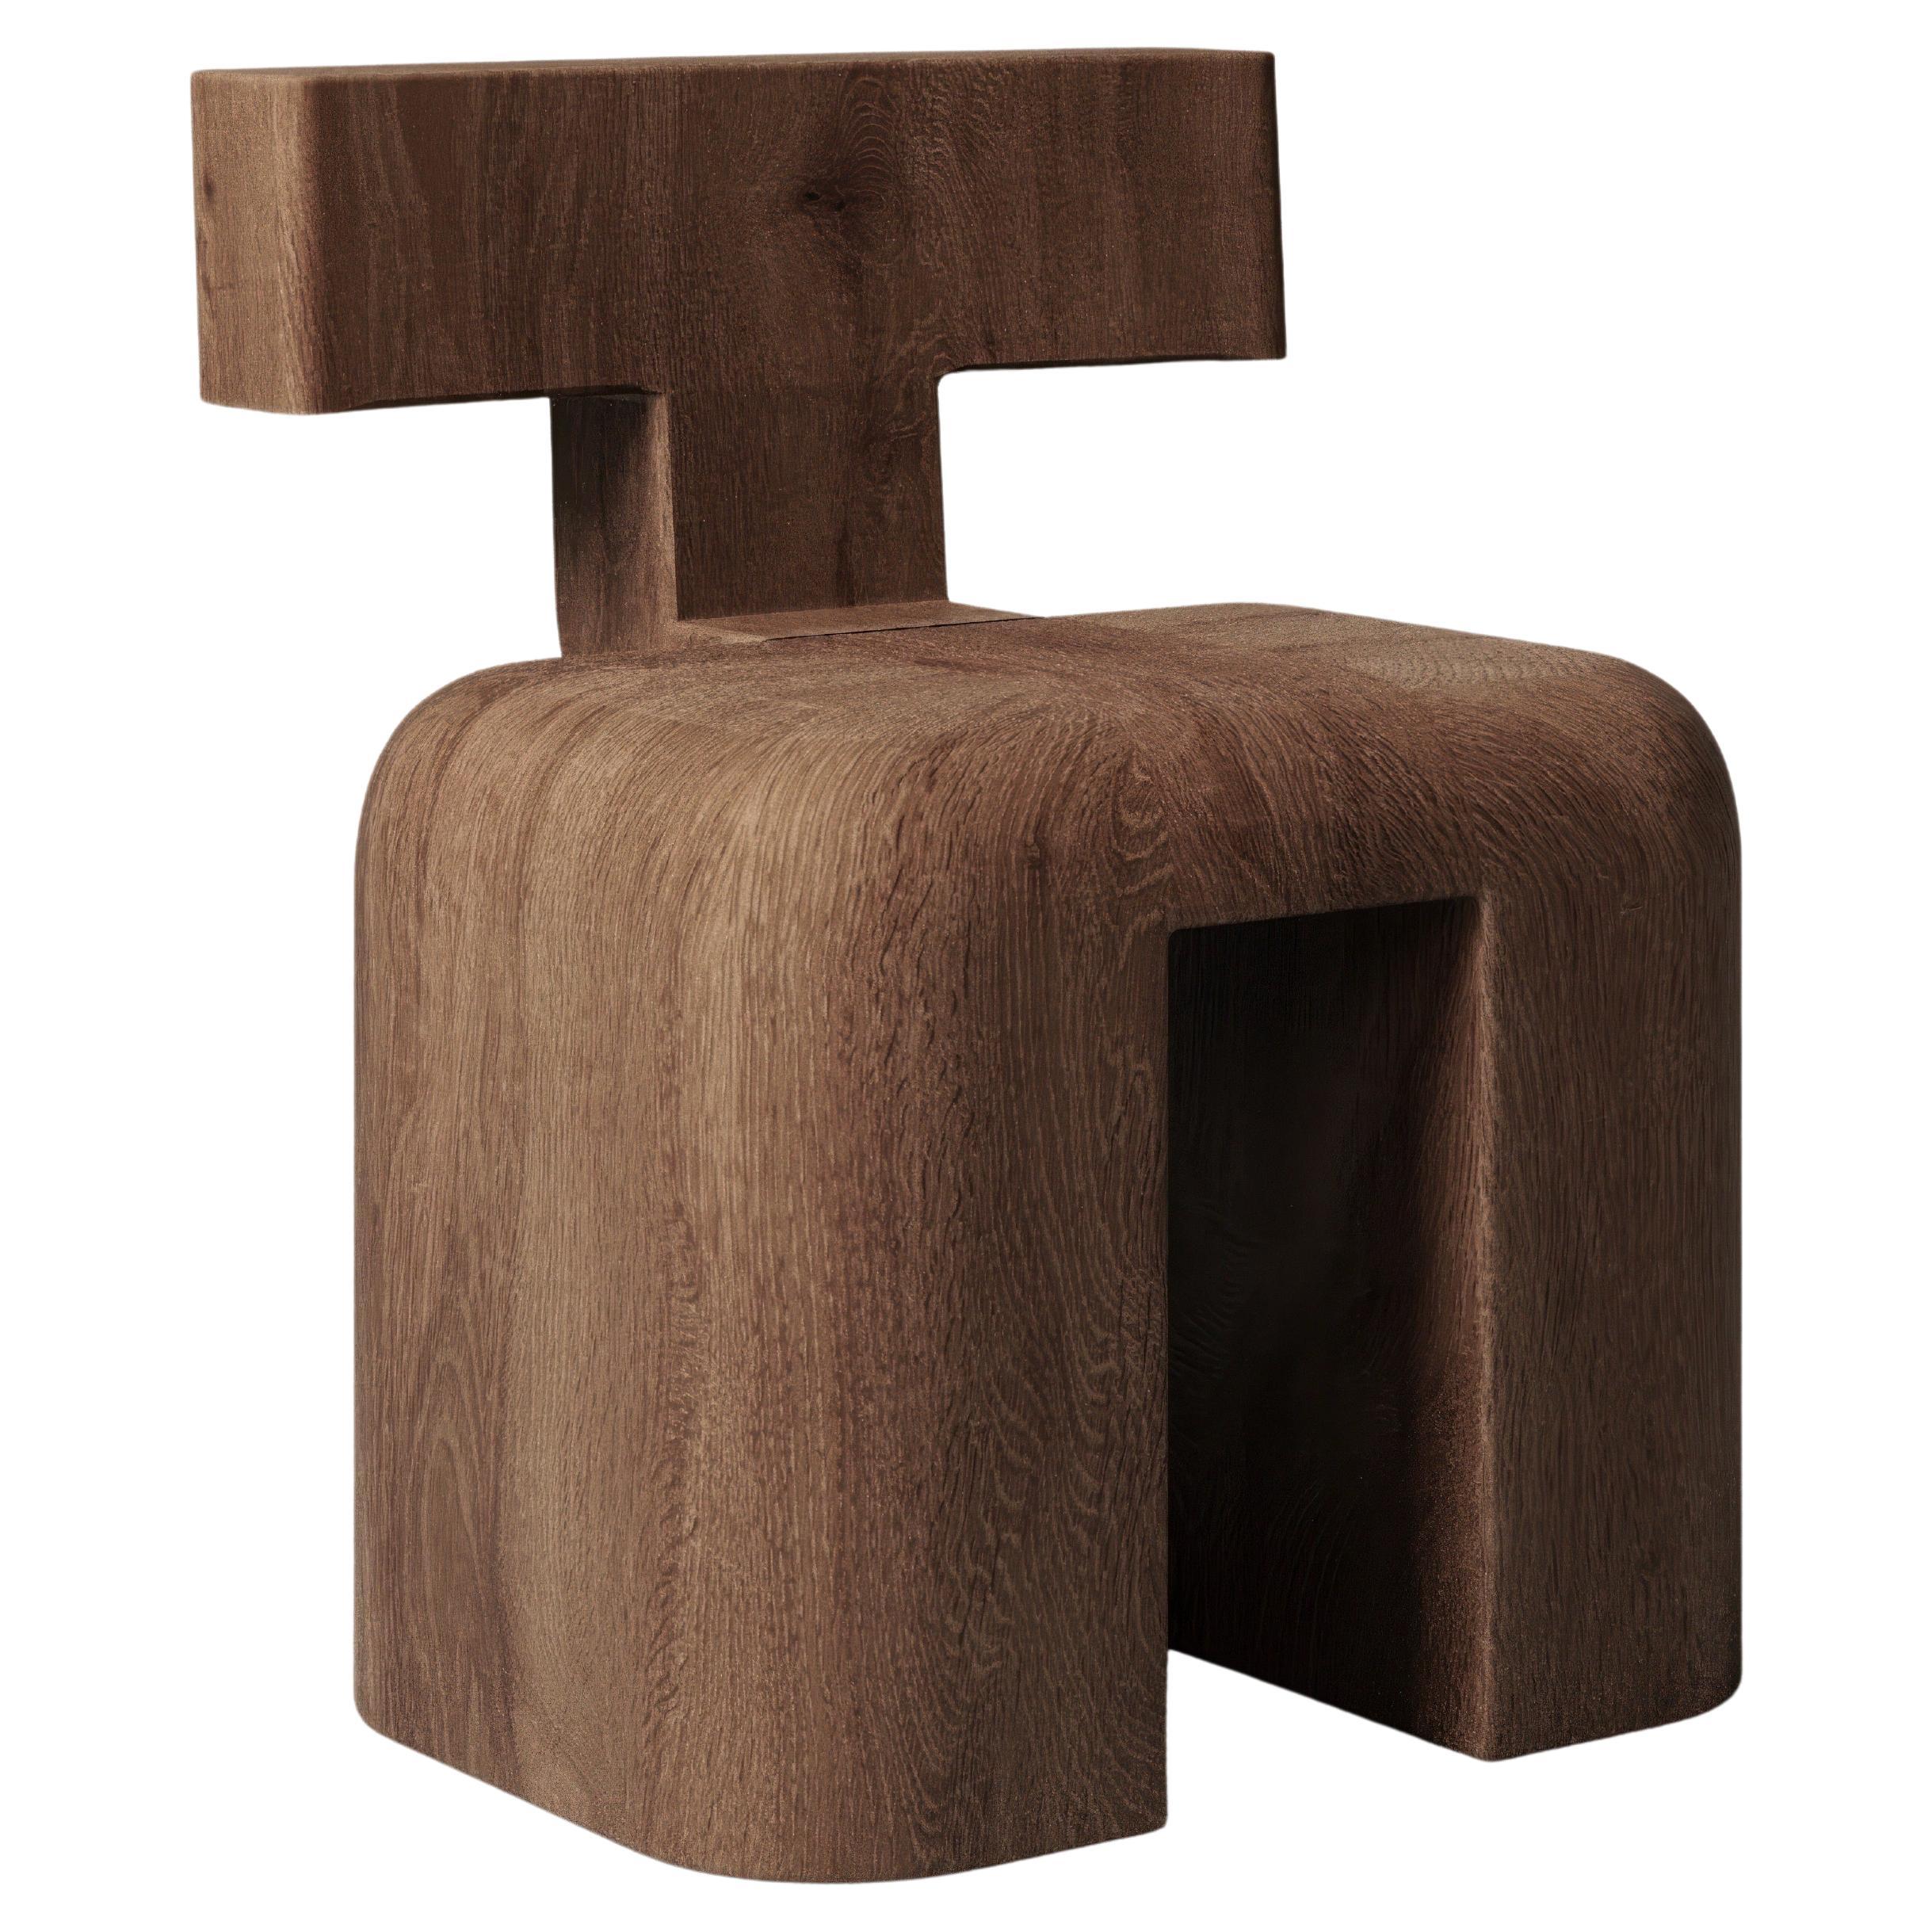 M_013 White Oak Dining Chair by Monolith Studio For Sale